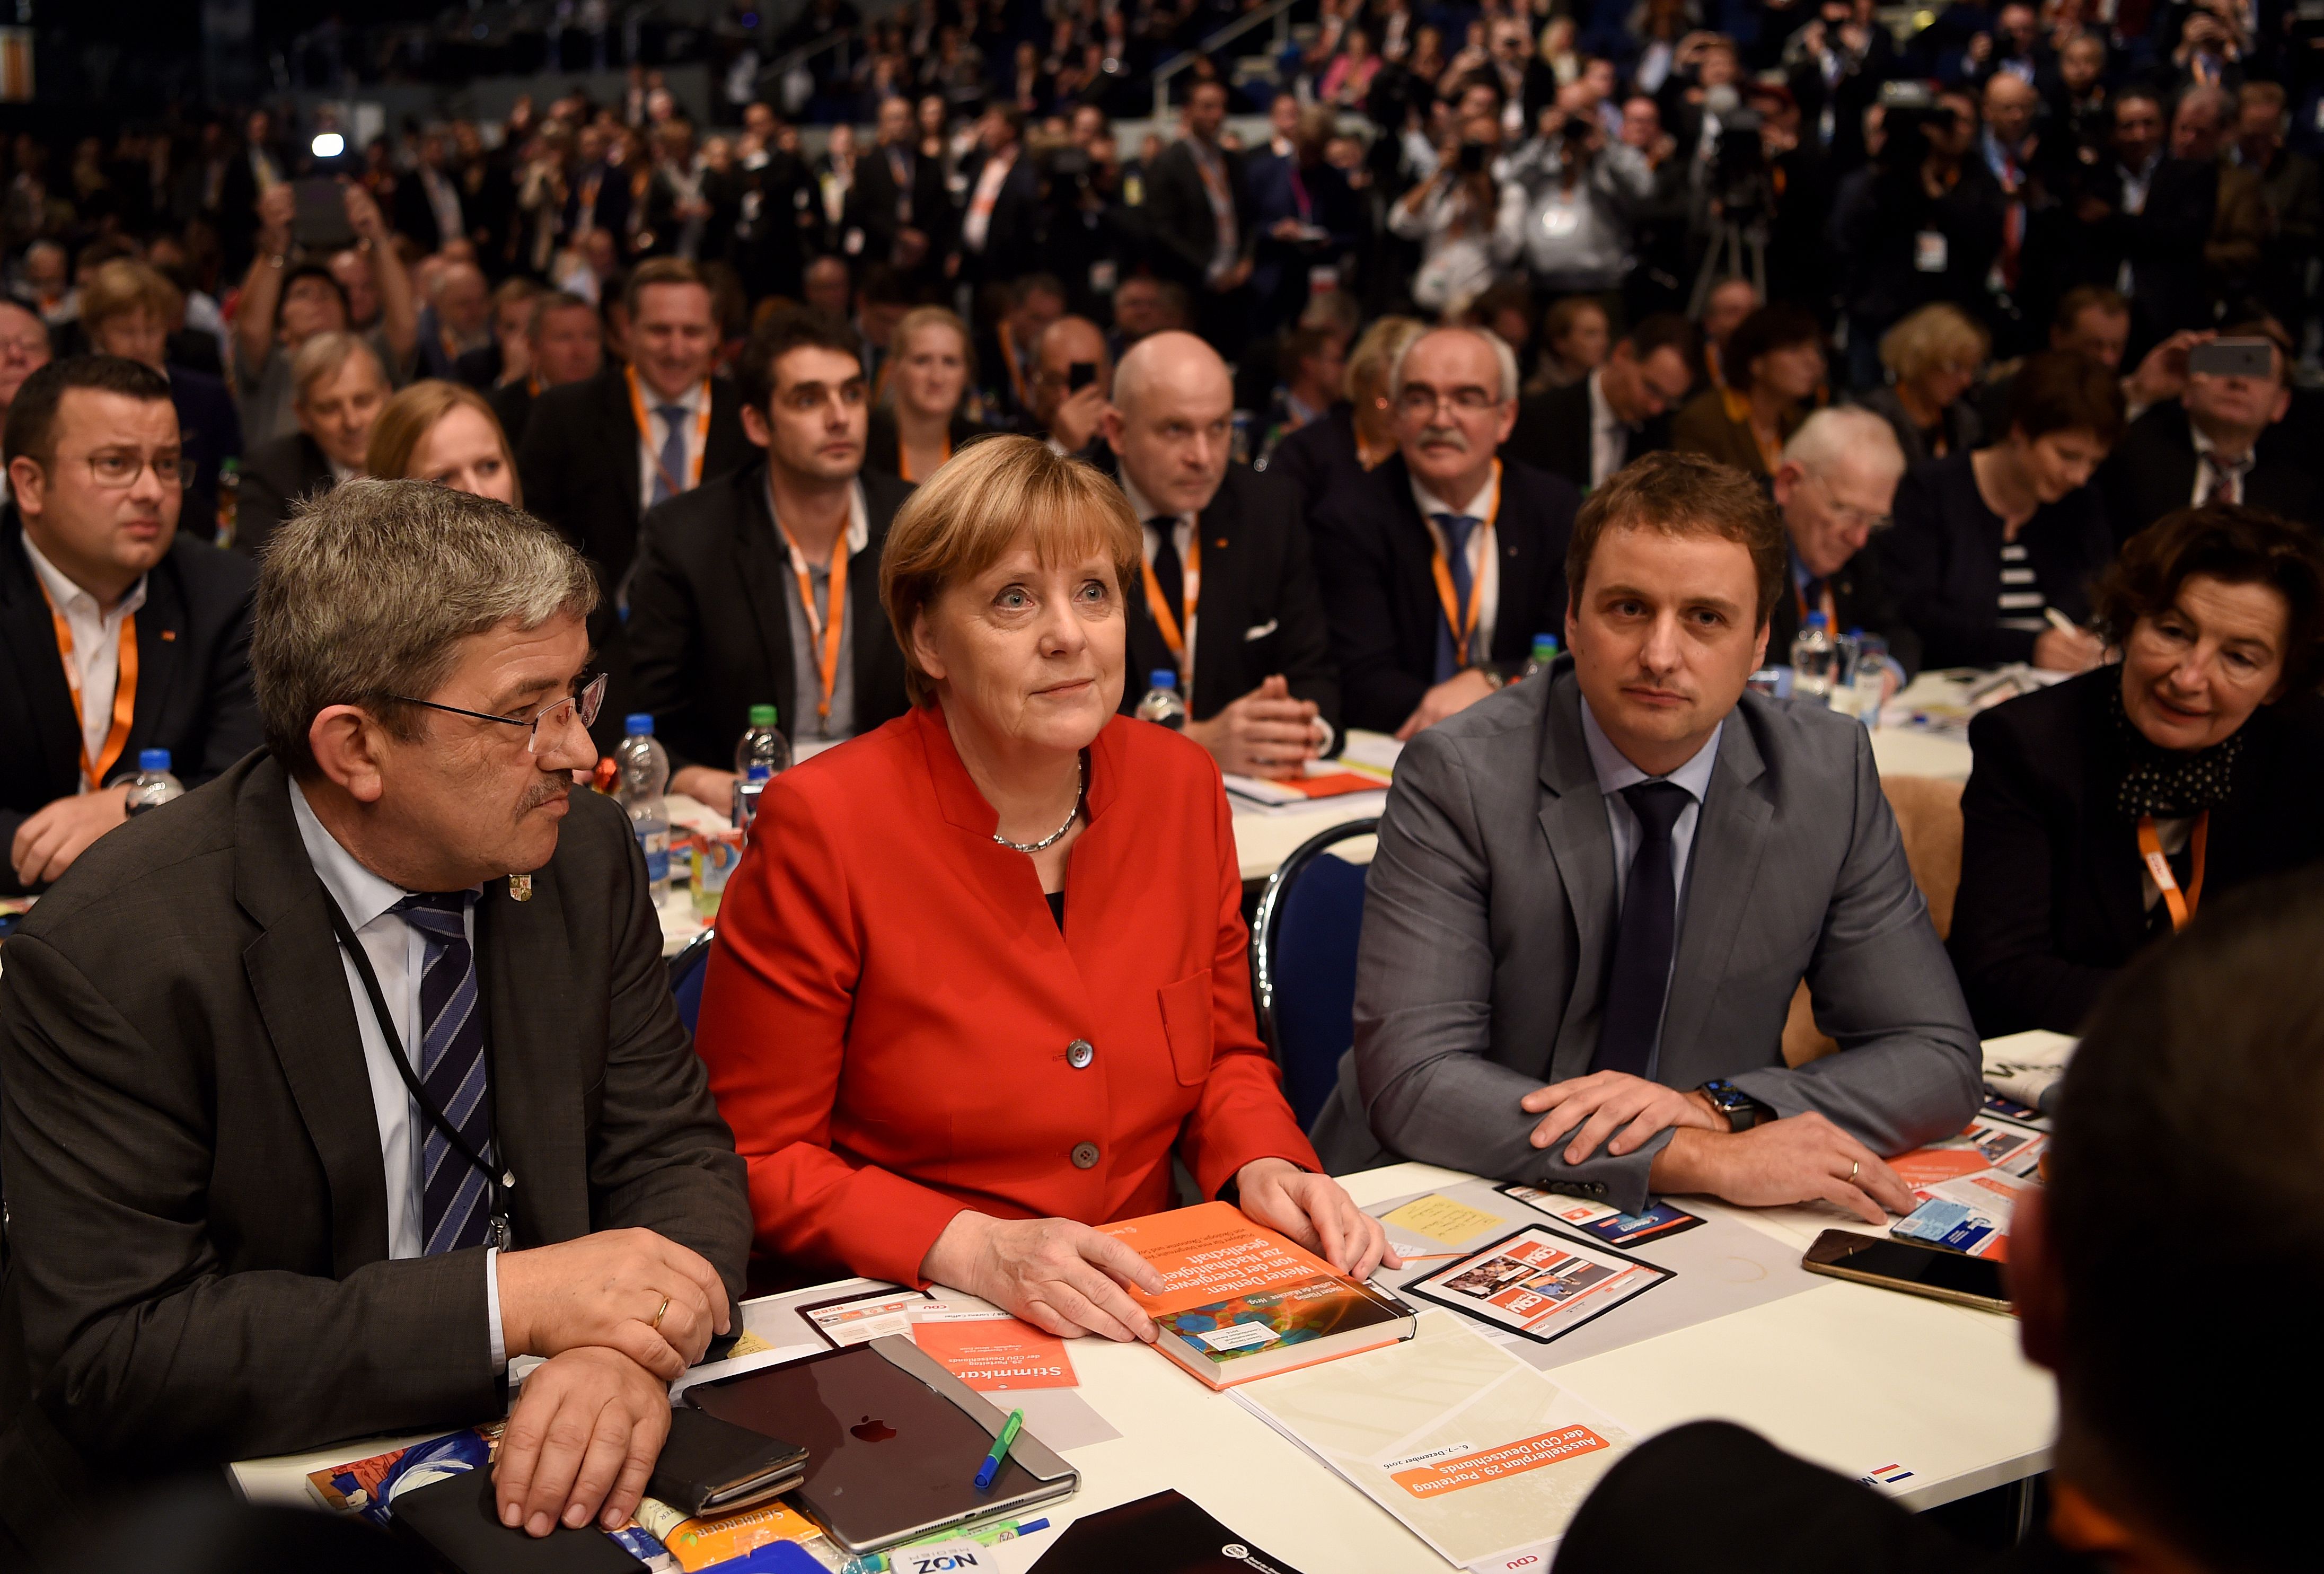 Merkel re-elected to CDU party chair with 89.5% of vote